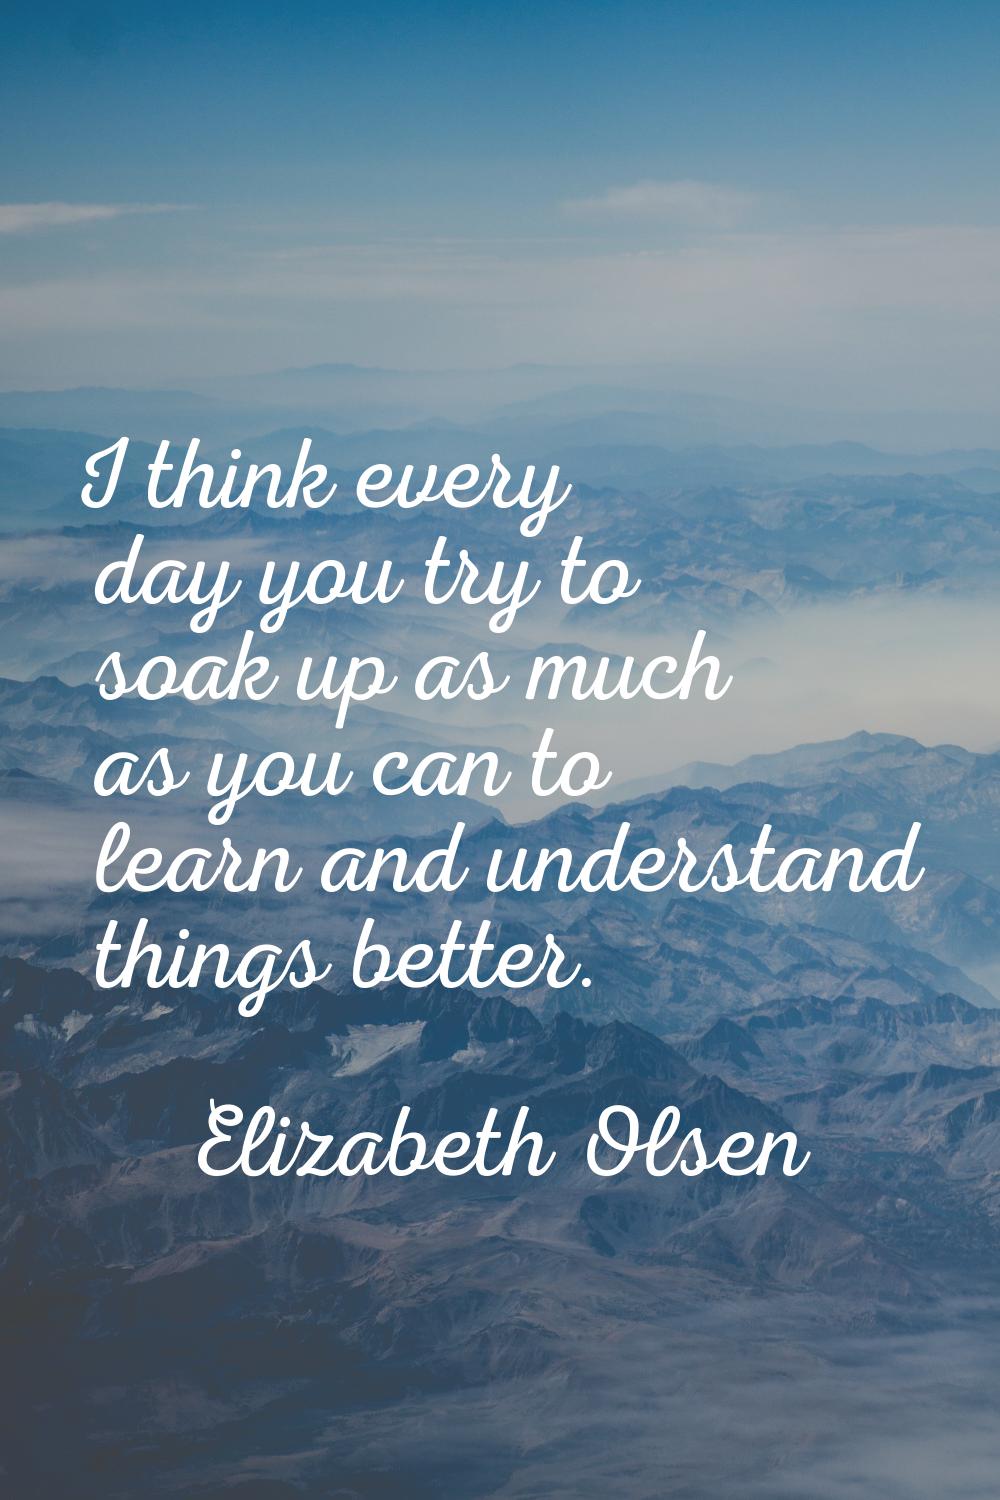 I think every day you try to soak up as much as you can to learn and understand things better.